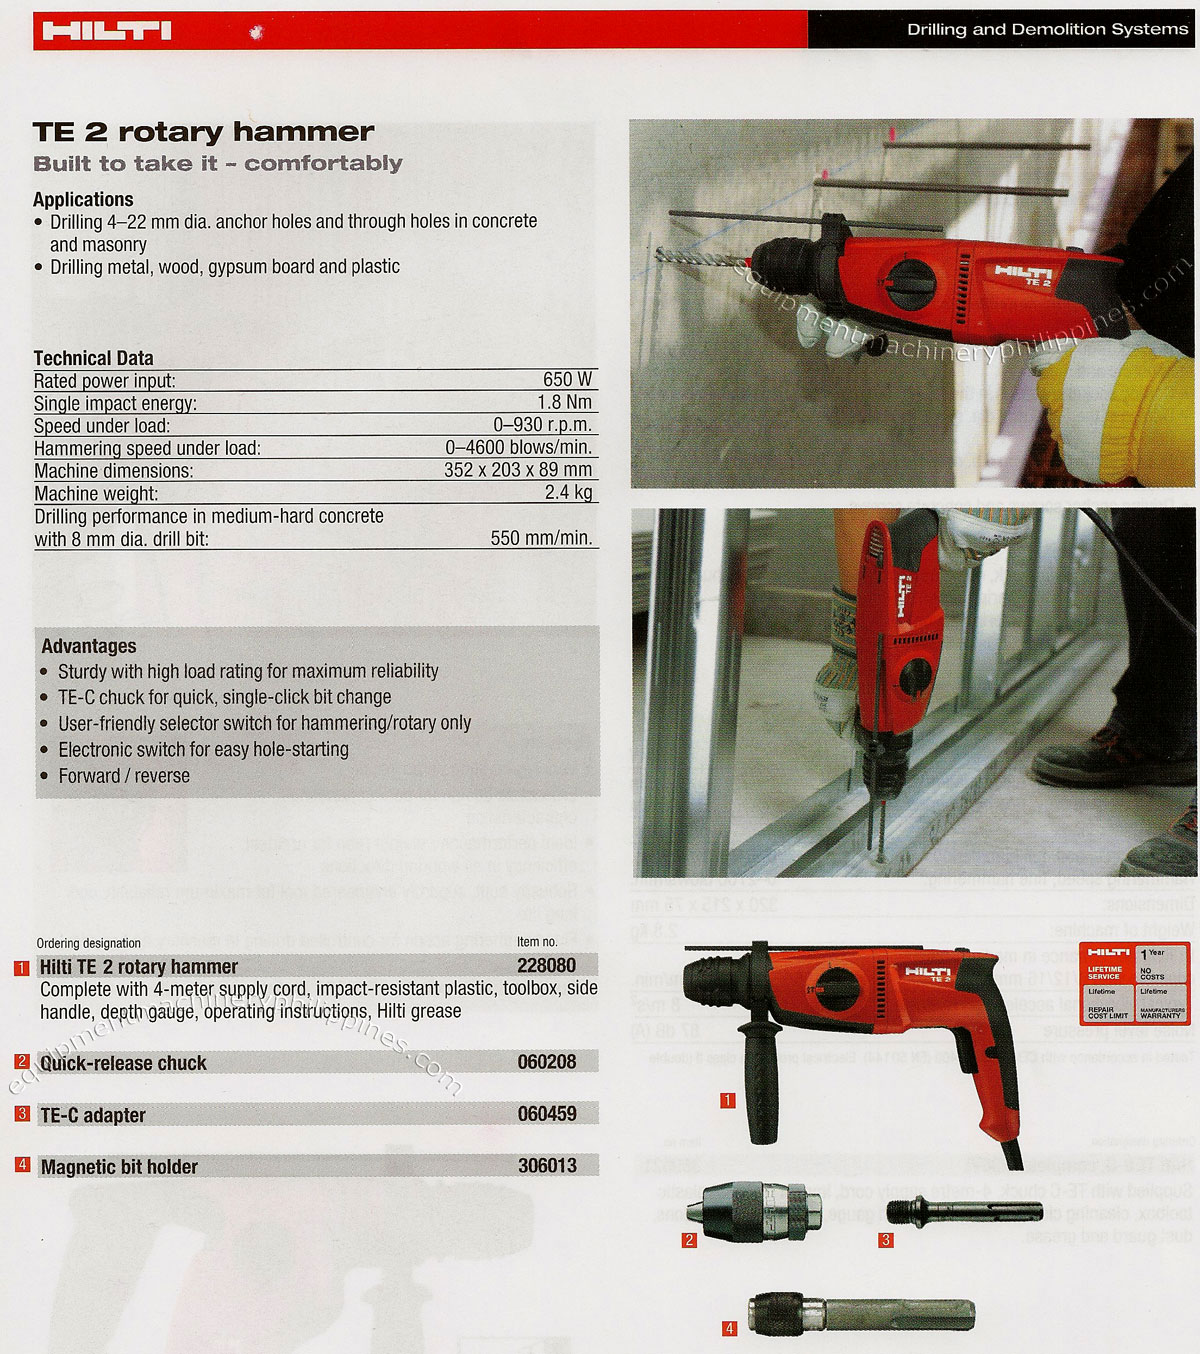 TE 2 Rotary Hammer for Drilling and Demolition